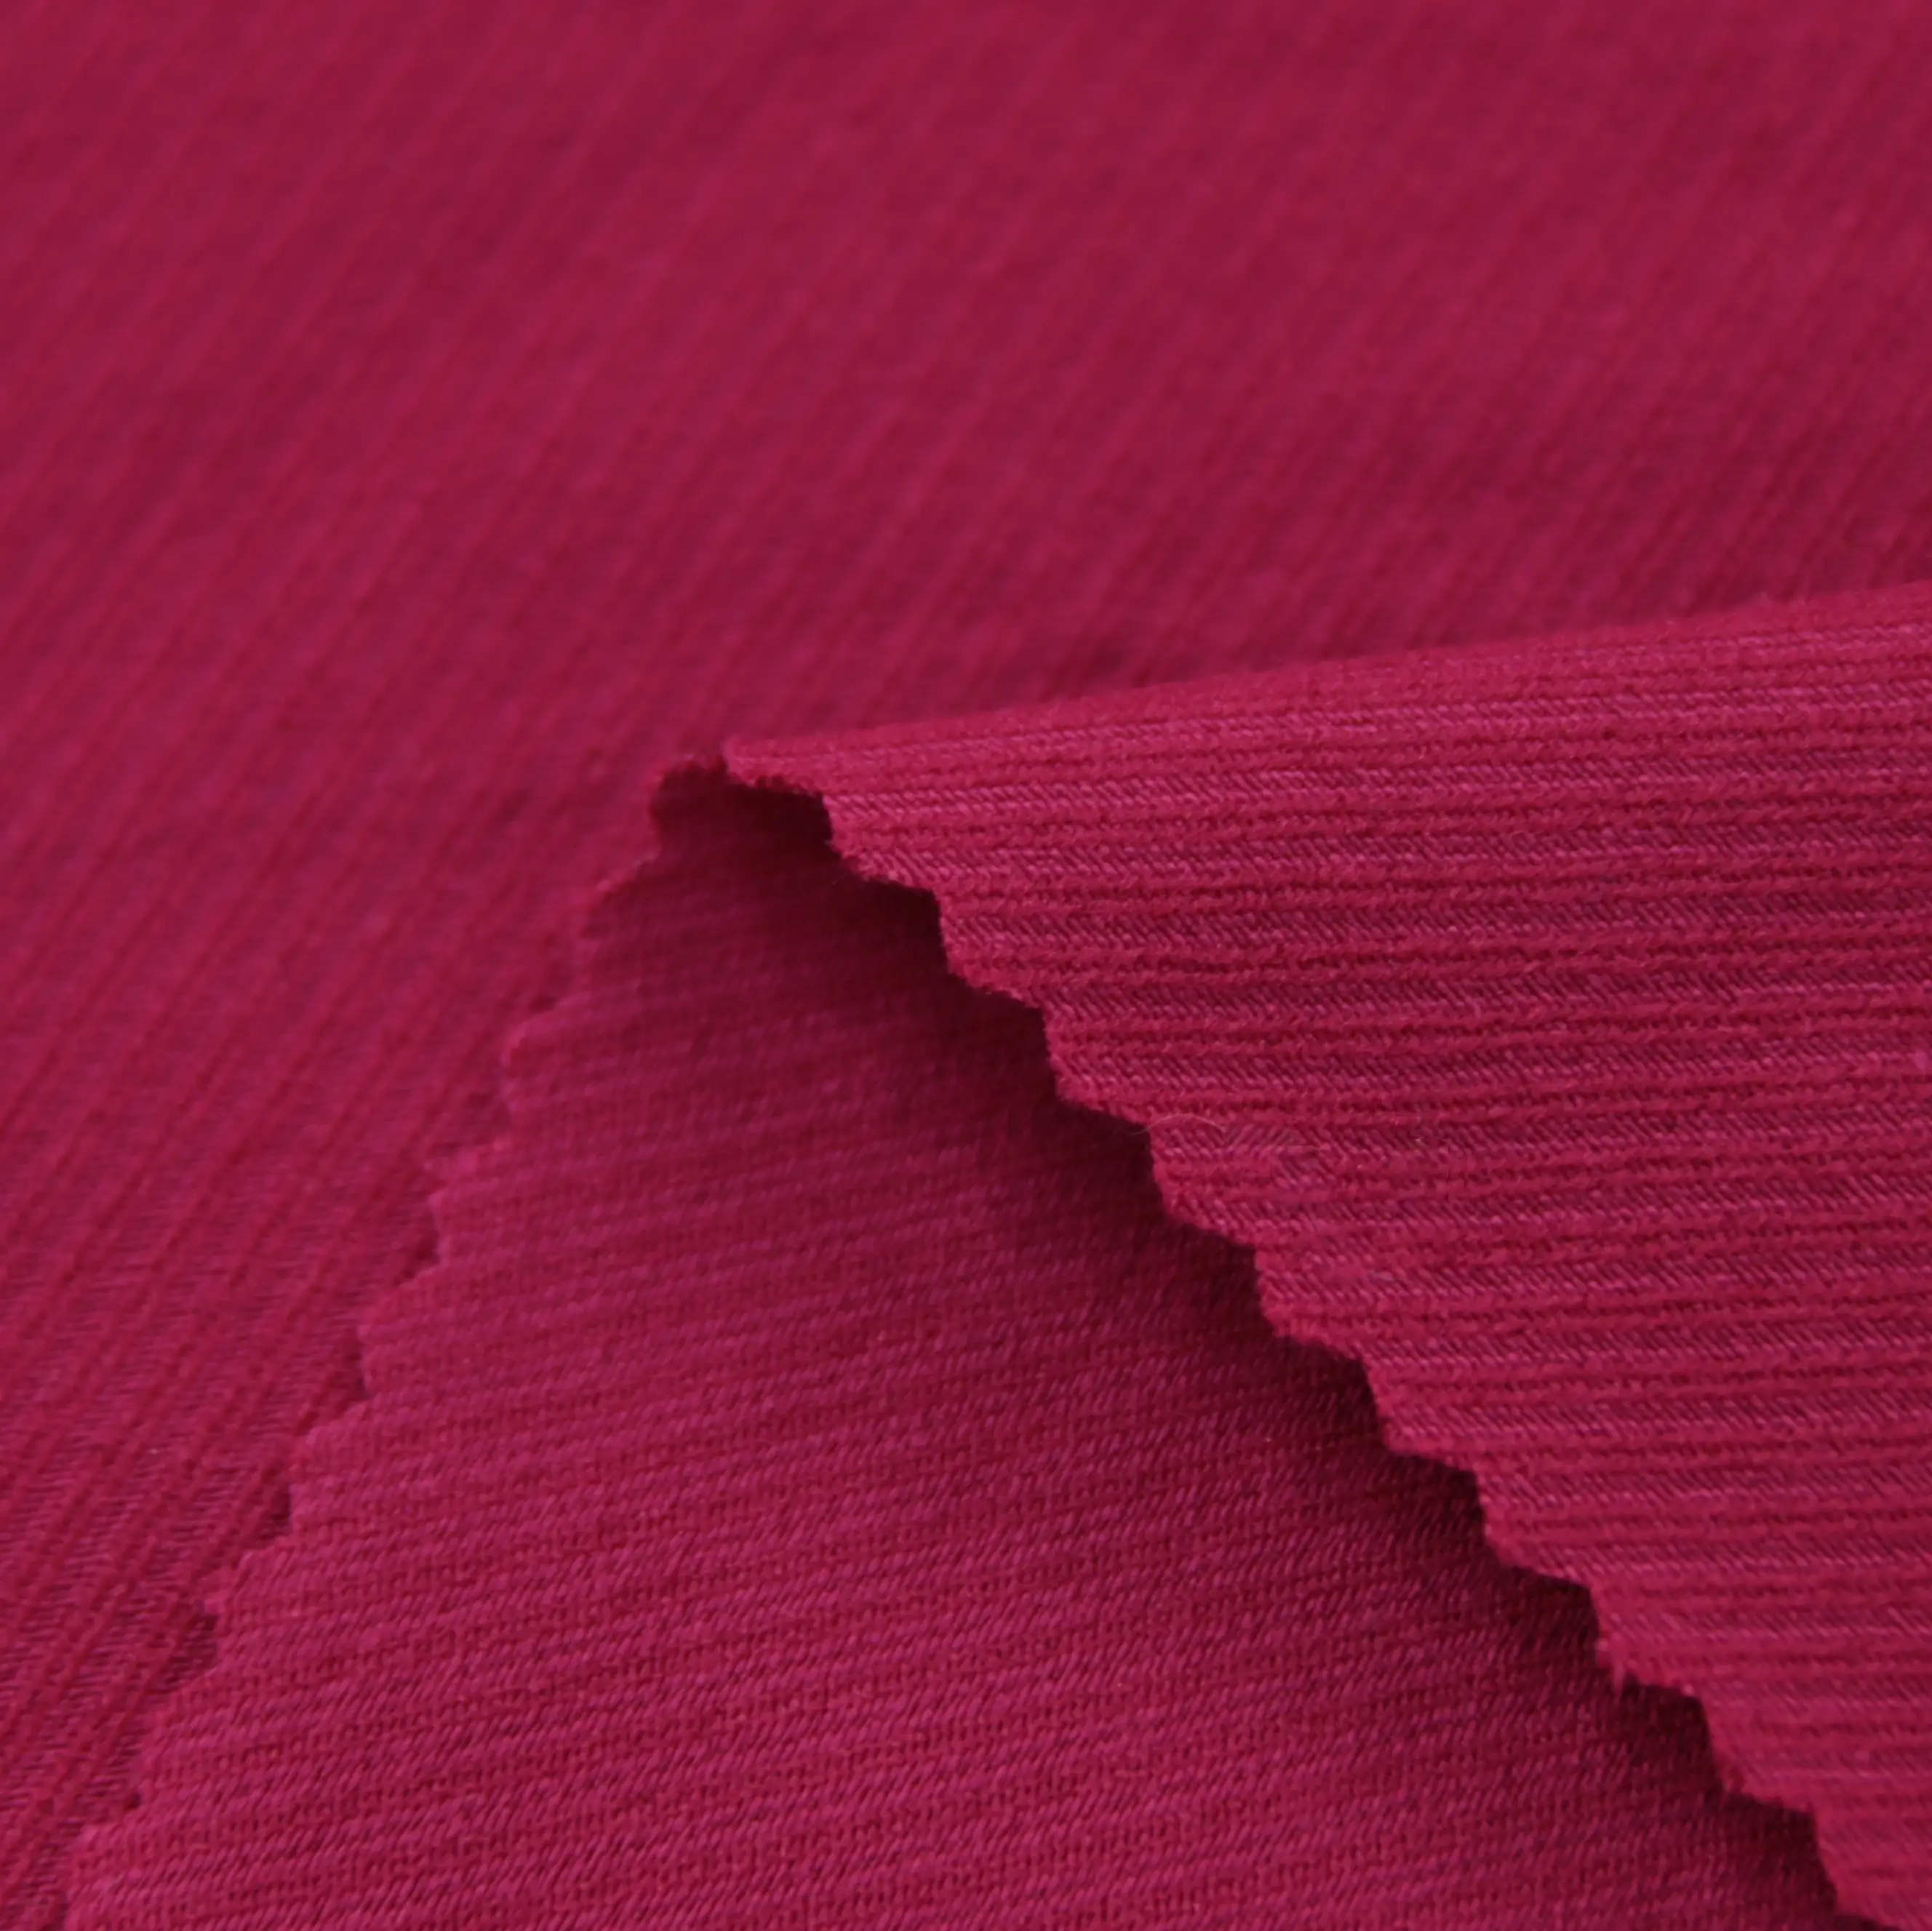 support custom Wholesale wide twill style 45%nylon 50%royan 5%sp stretch tussores grosgrain dyed fabric